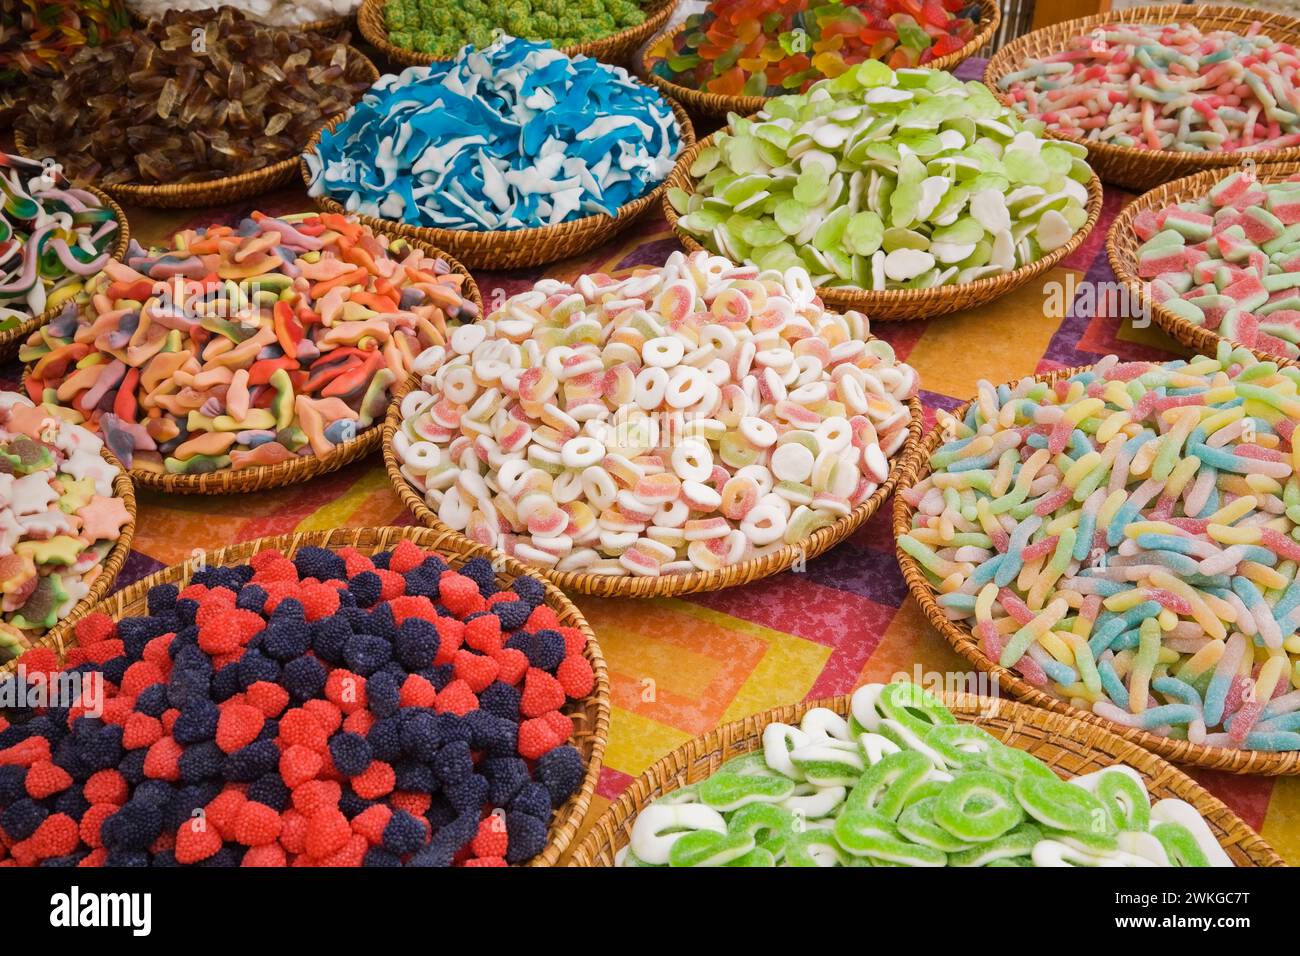 Baskets of assorted candies on display at outdoor market, Budapest, Hungary. Stock Photo